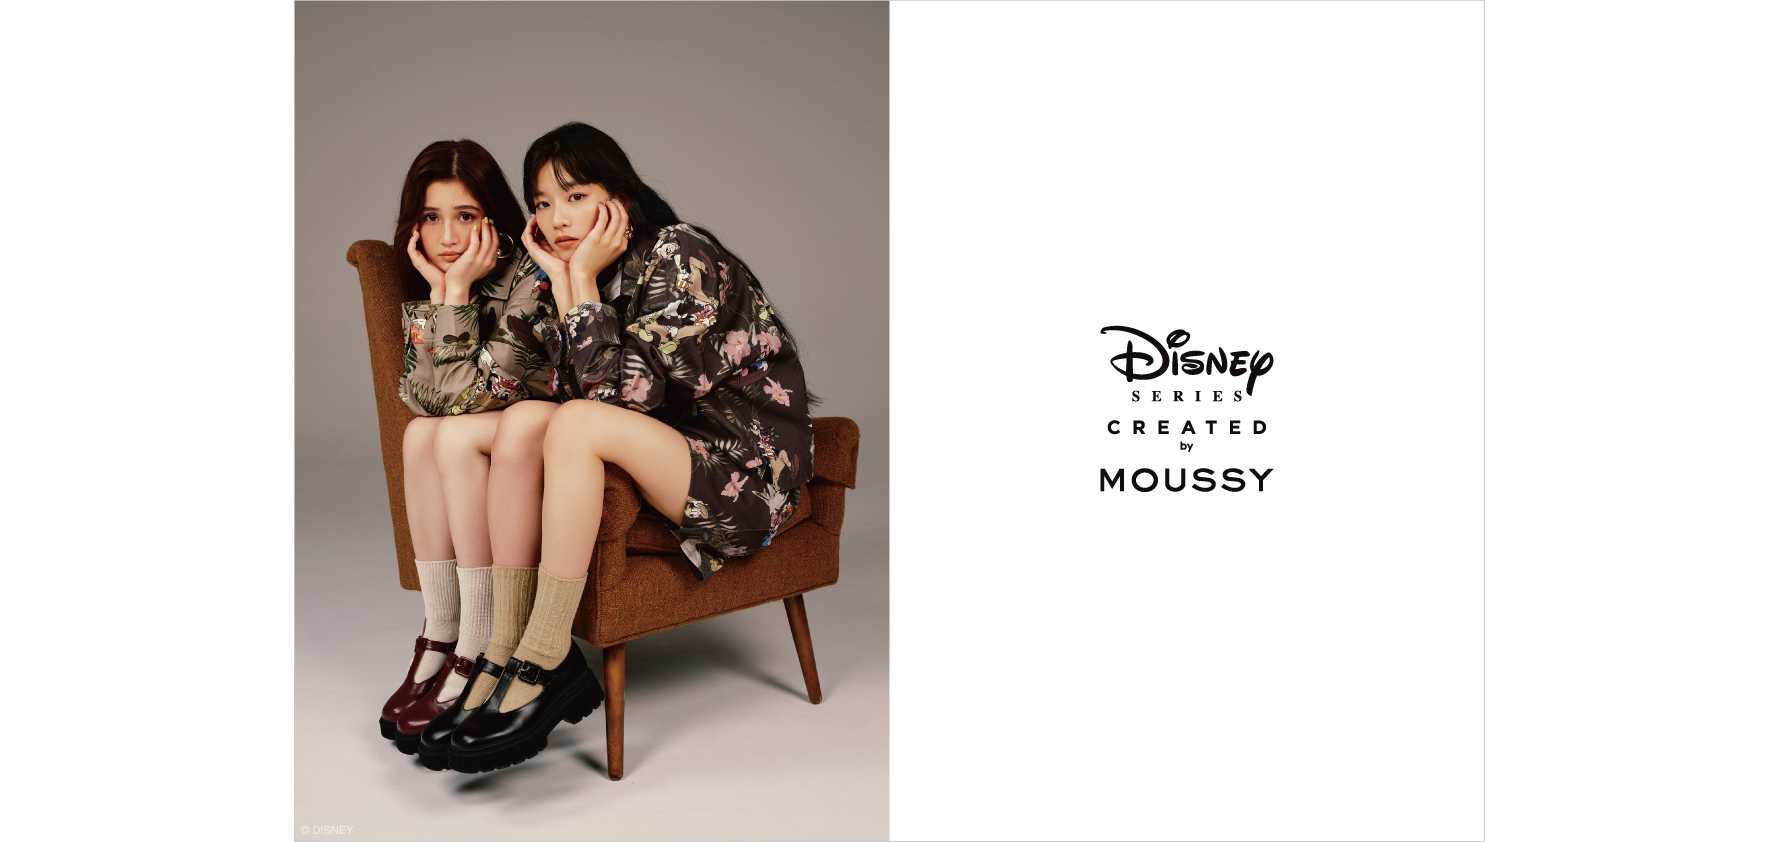 Disney SERIES CREATED by MOUSSY1